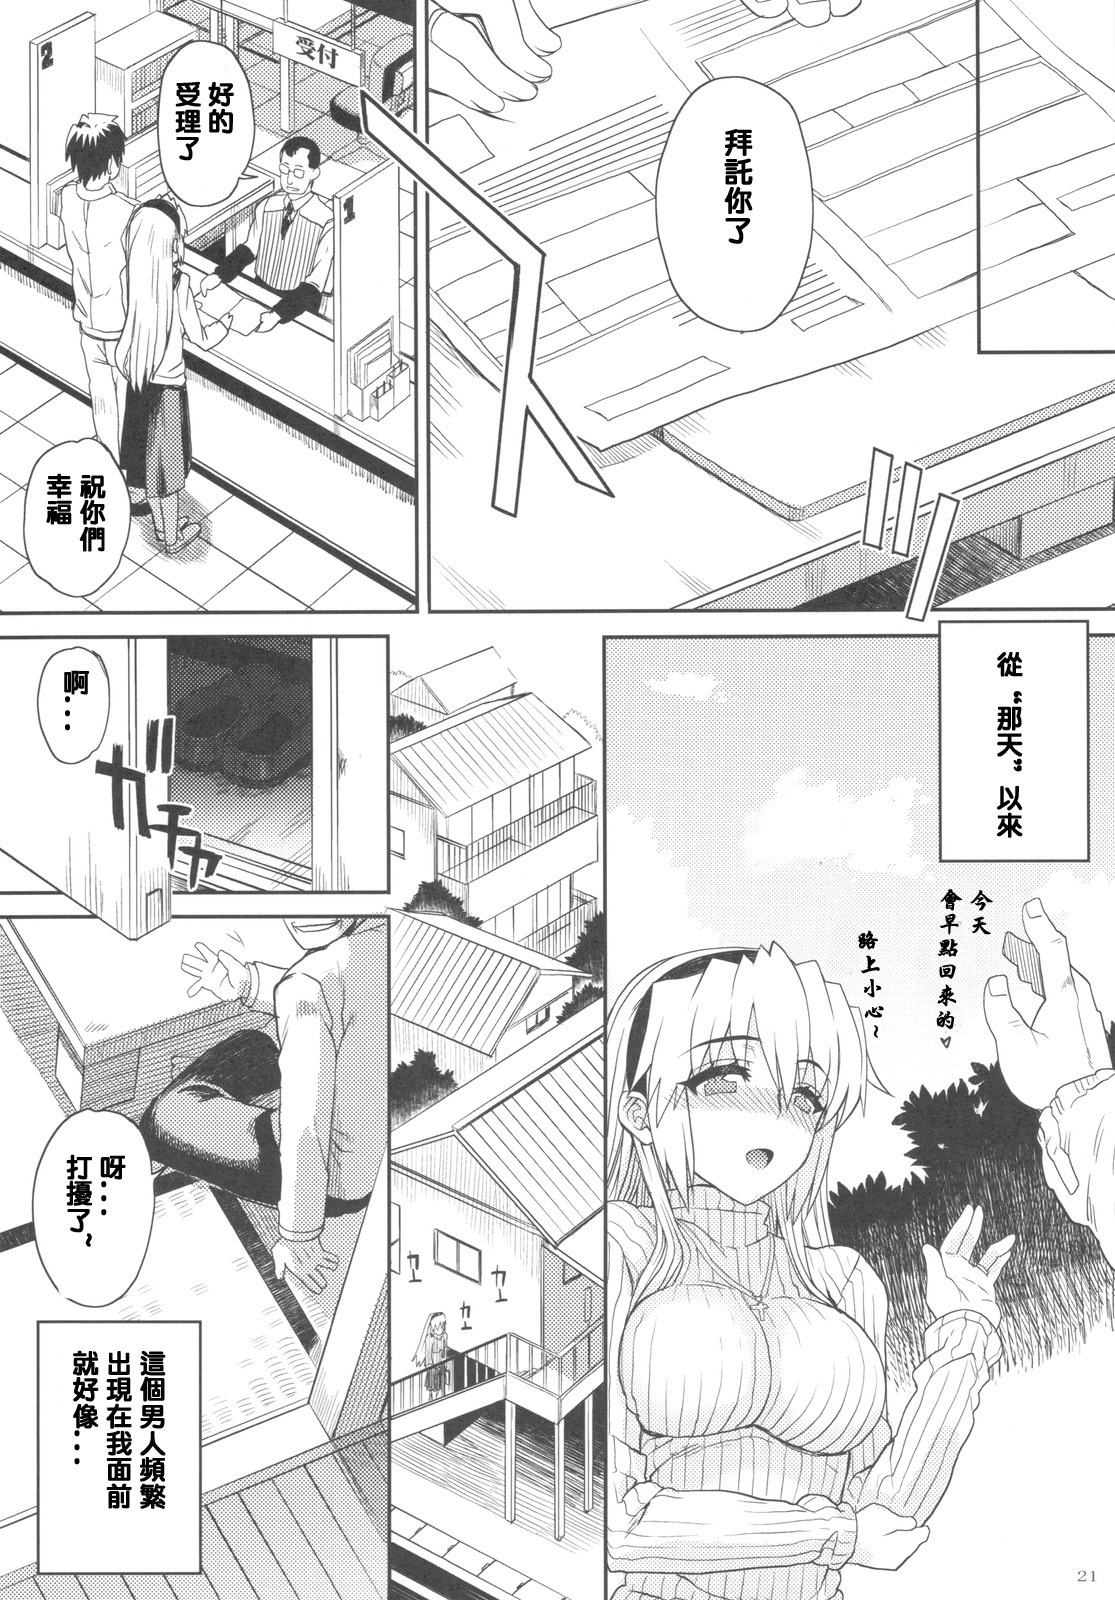 (COMIC1☆4) [Magono-Tei (Carn)] Kayumidome After Tomoyo Hen - Prescription 04 After (Clannad) [Chinese] [lzmcsa個人漢化] page 22 full